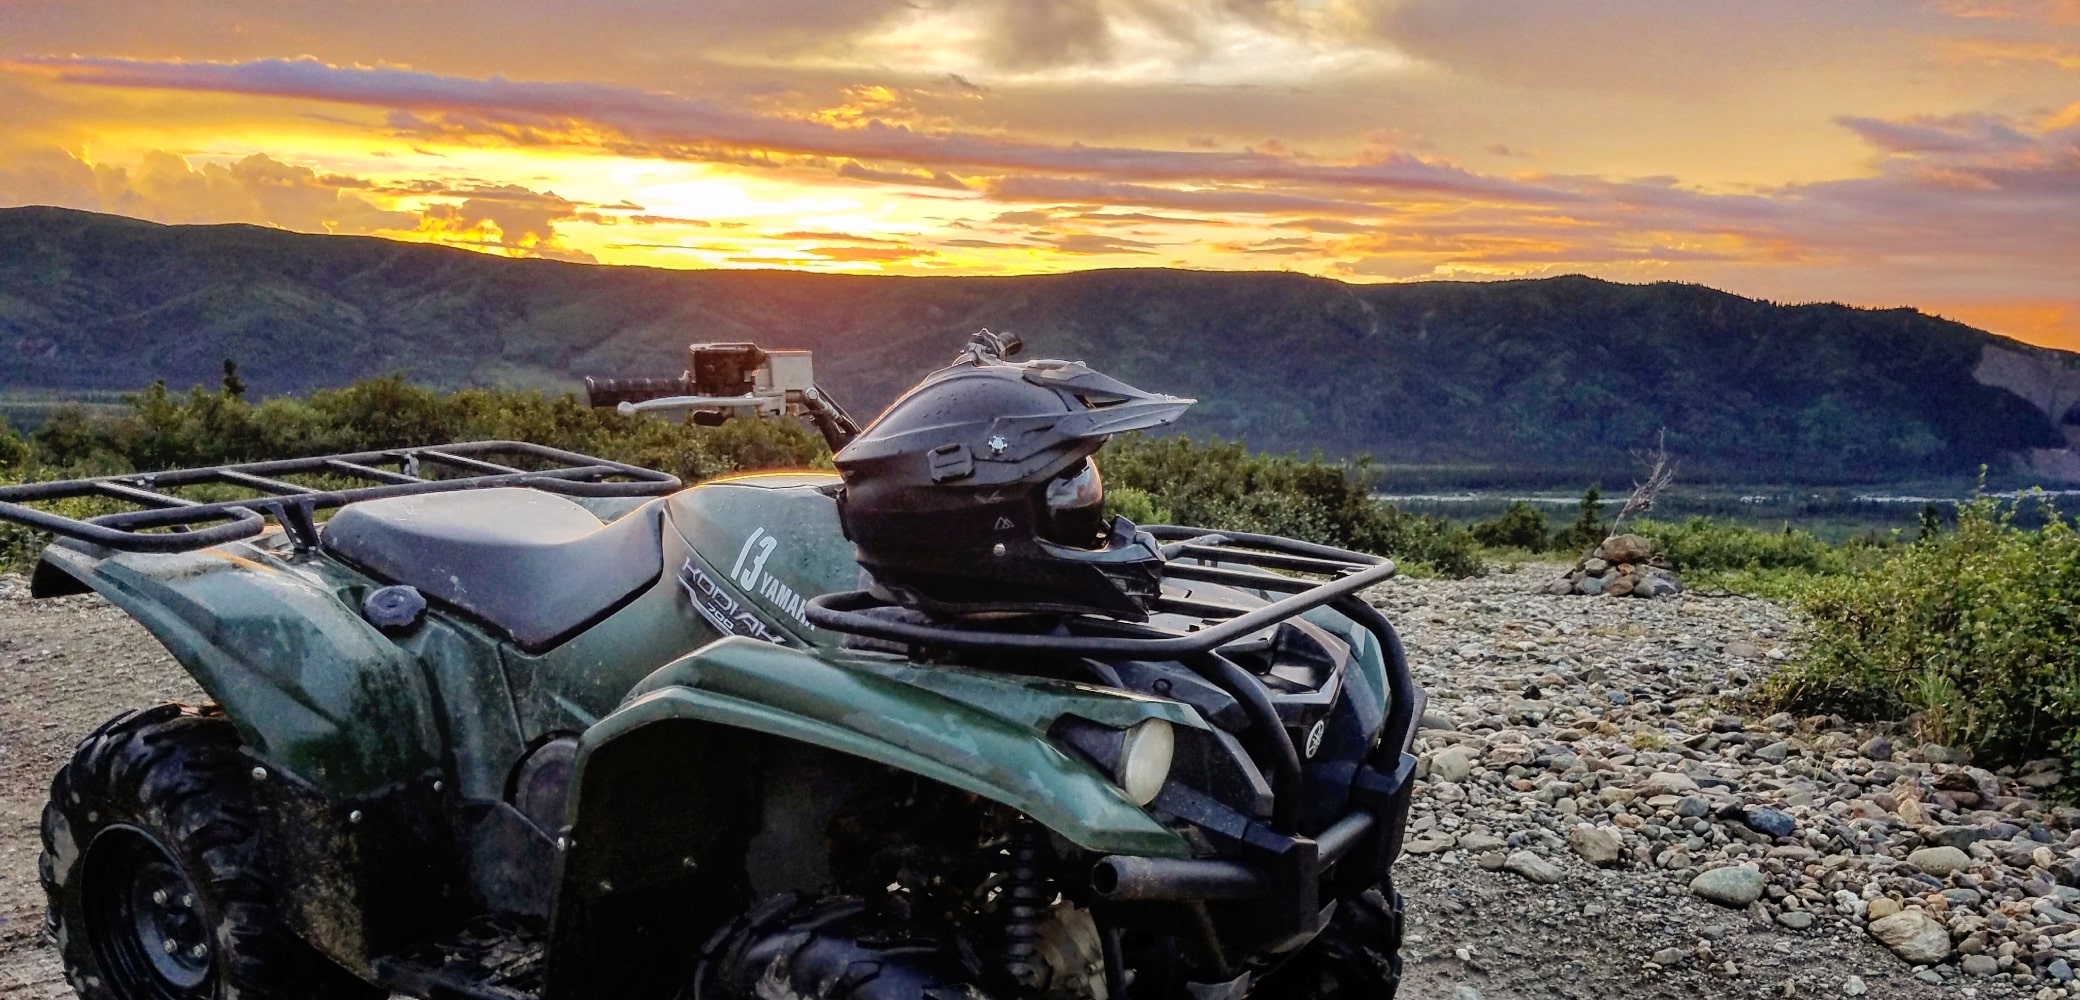 atv parked with a helmet during a denali sunset